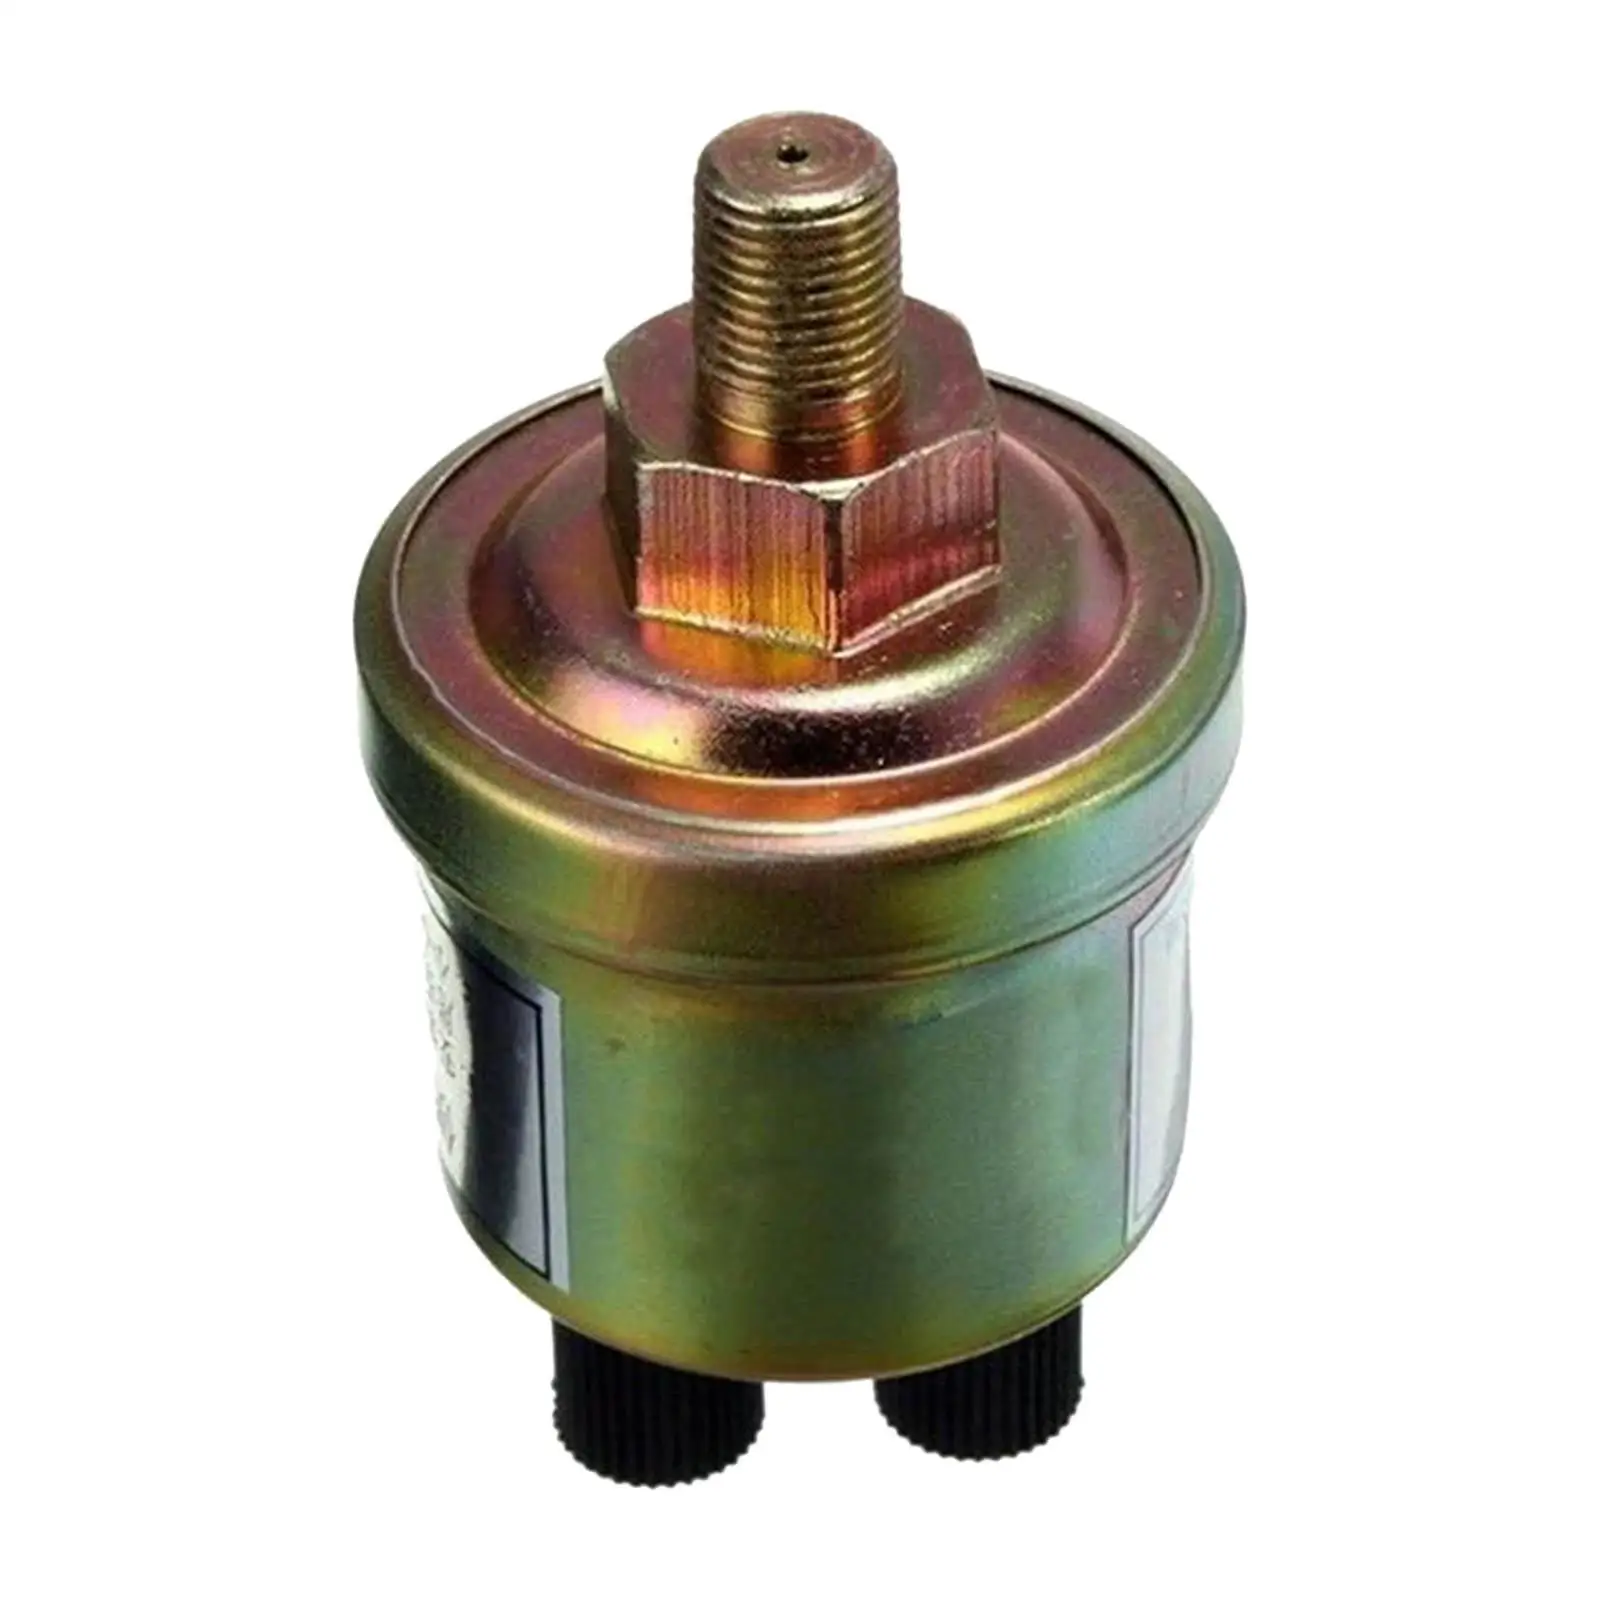 1/8NPT Screw Thread Engine Oil Pressure Sensor, Replaces Durable Easy to Install Professional Wide Applicability Premium Quality